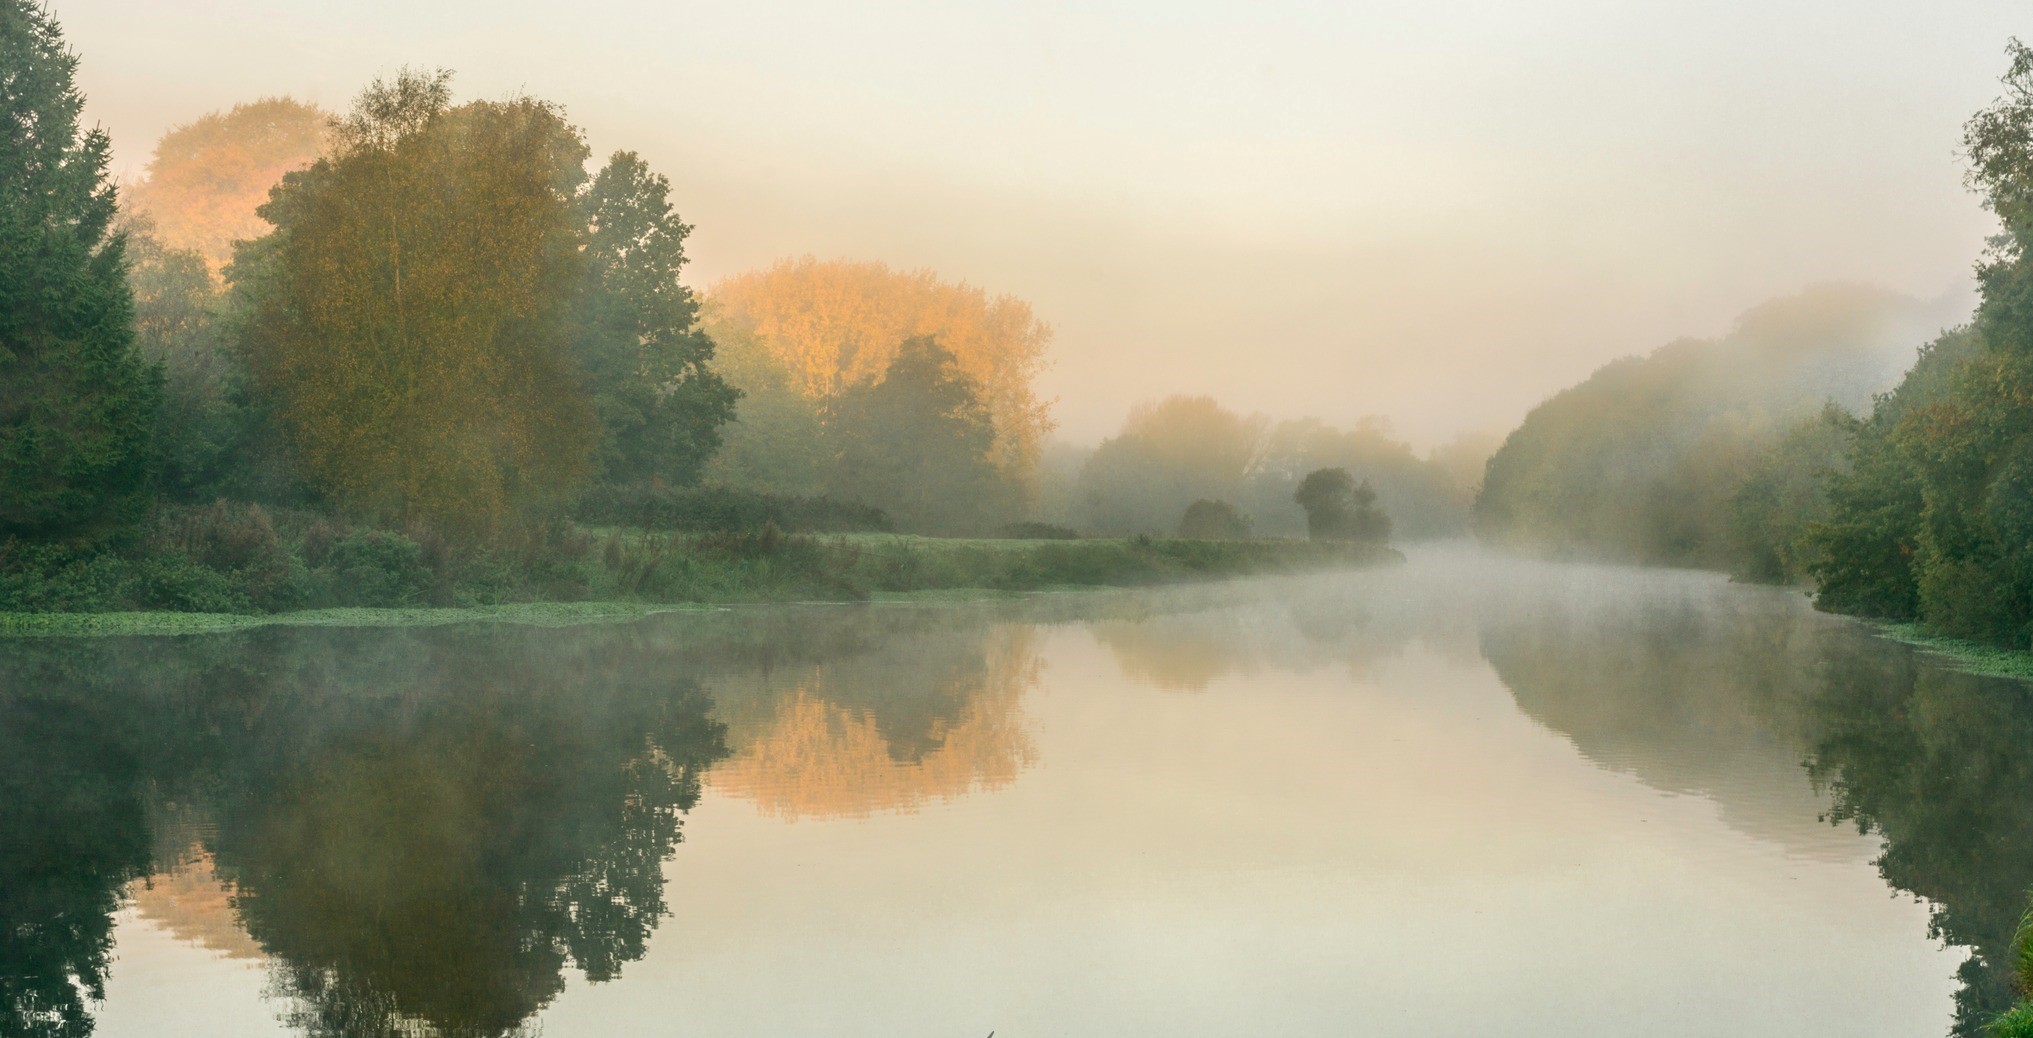 Misty morning on the River Weaver by Alan Bailey